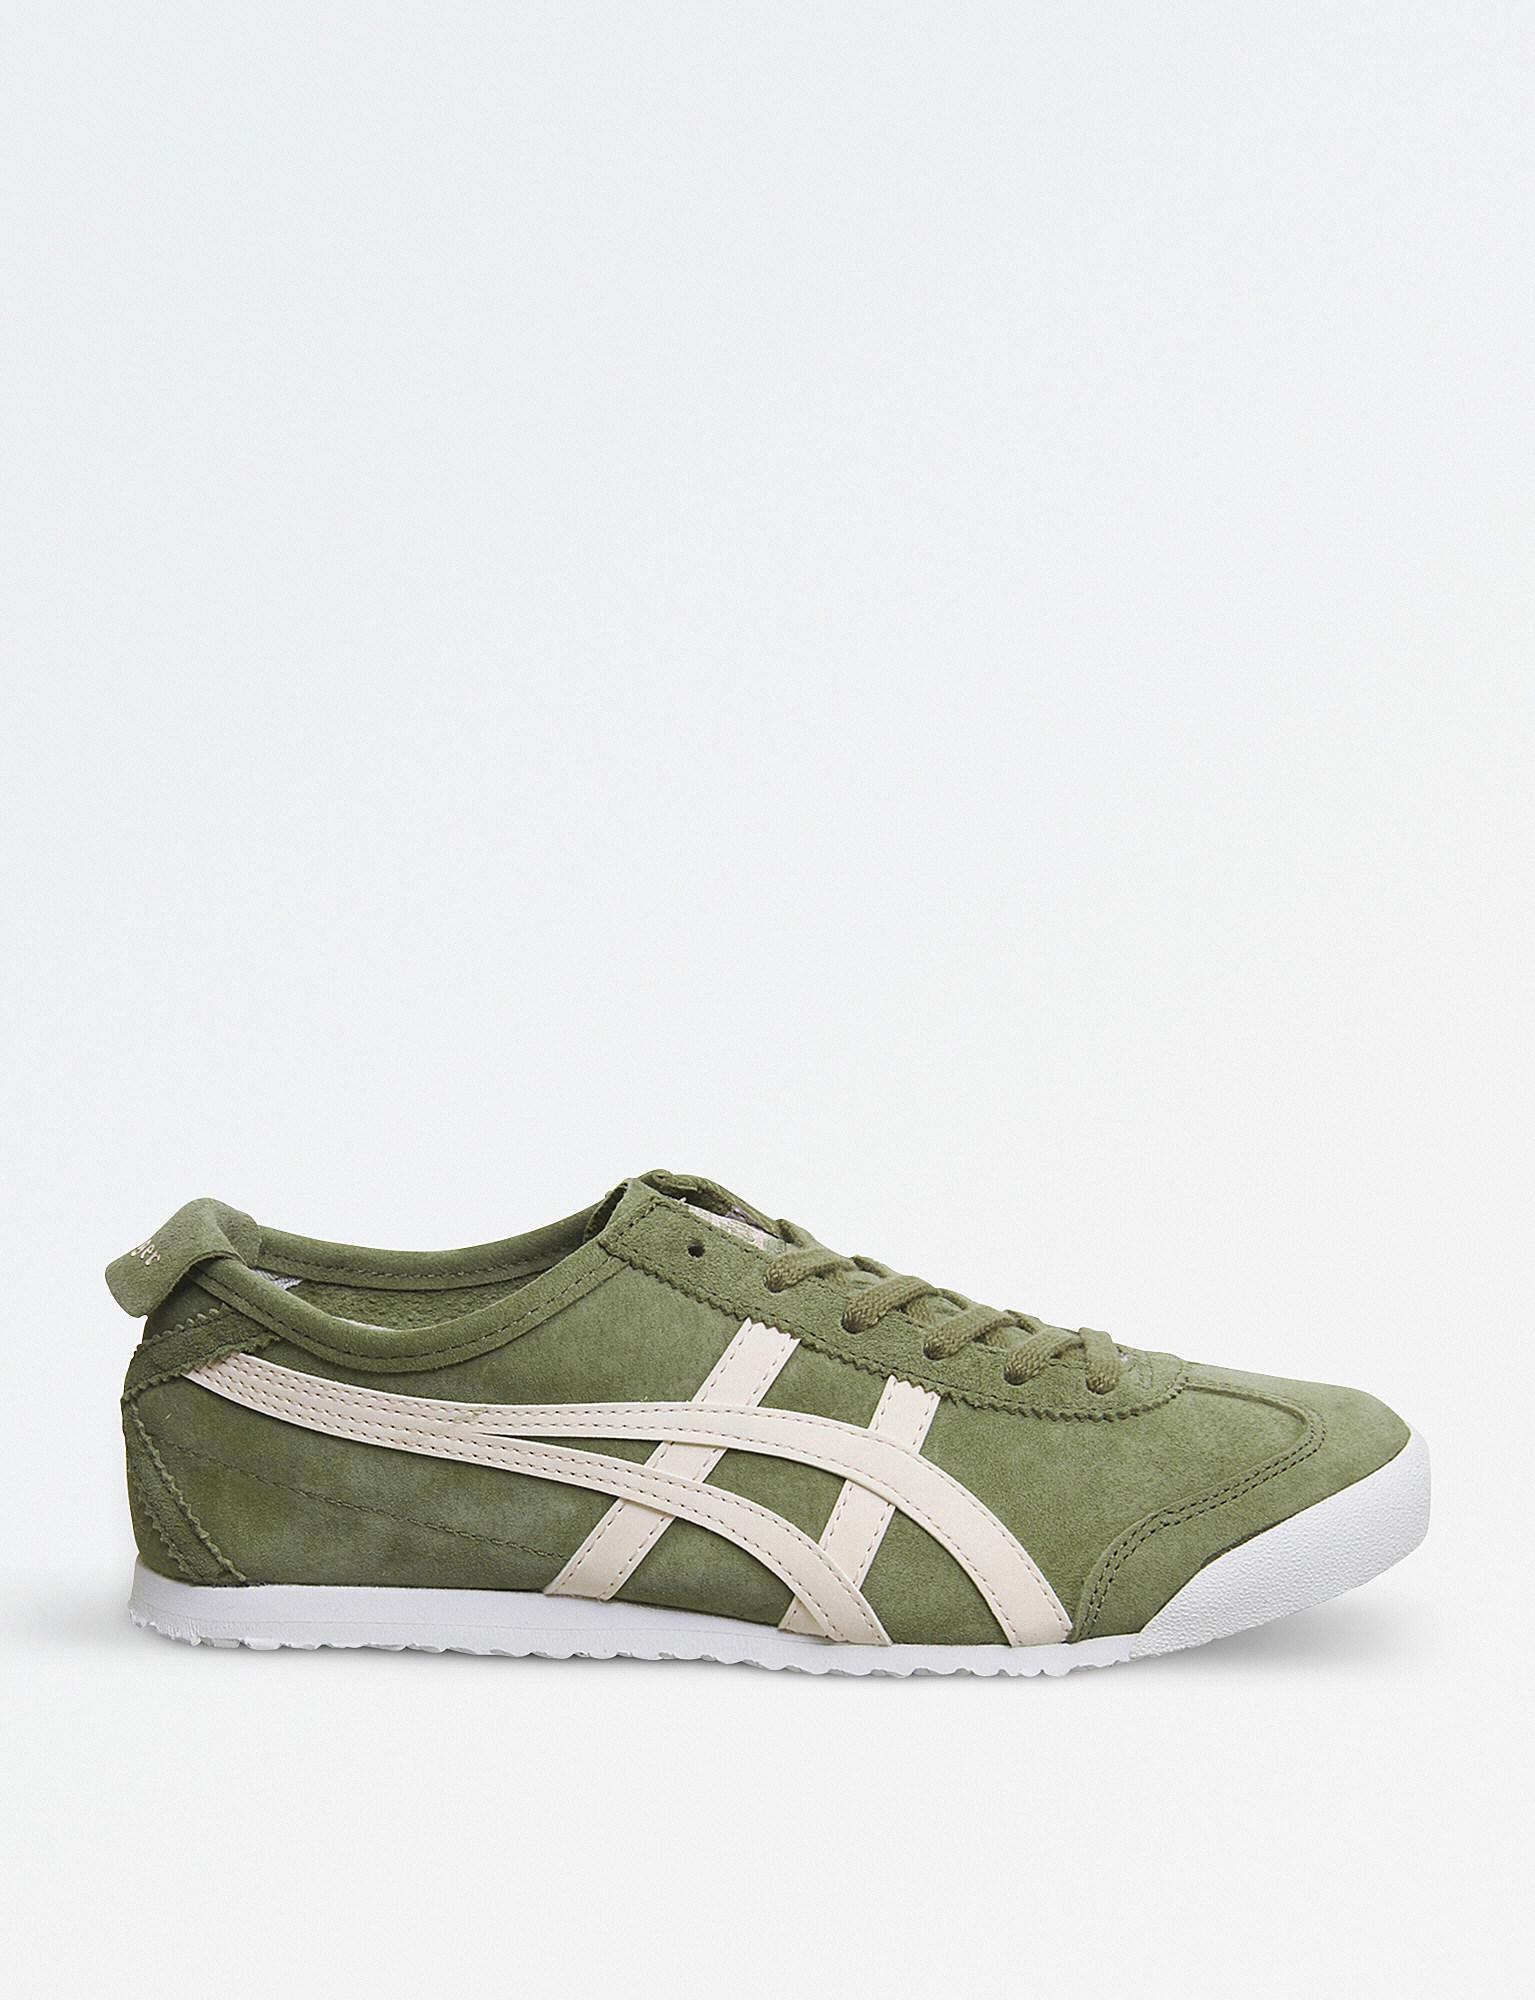 Onitsuka Tiger Mexico 66 Suede Trainers in Khaki Pink Suede (Green) for ...